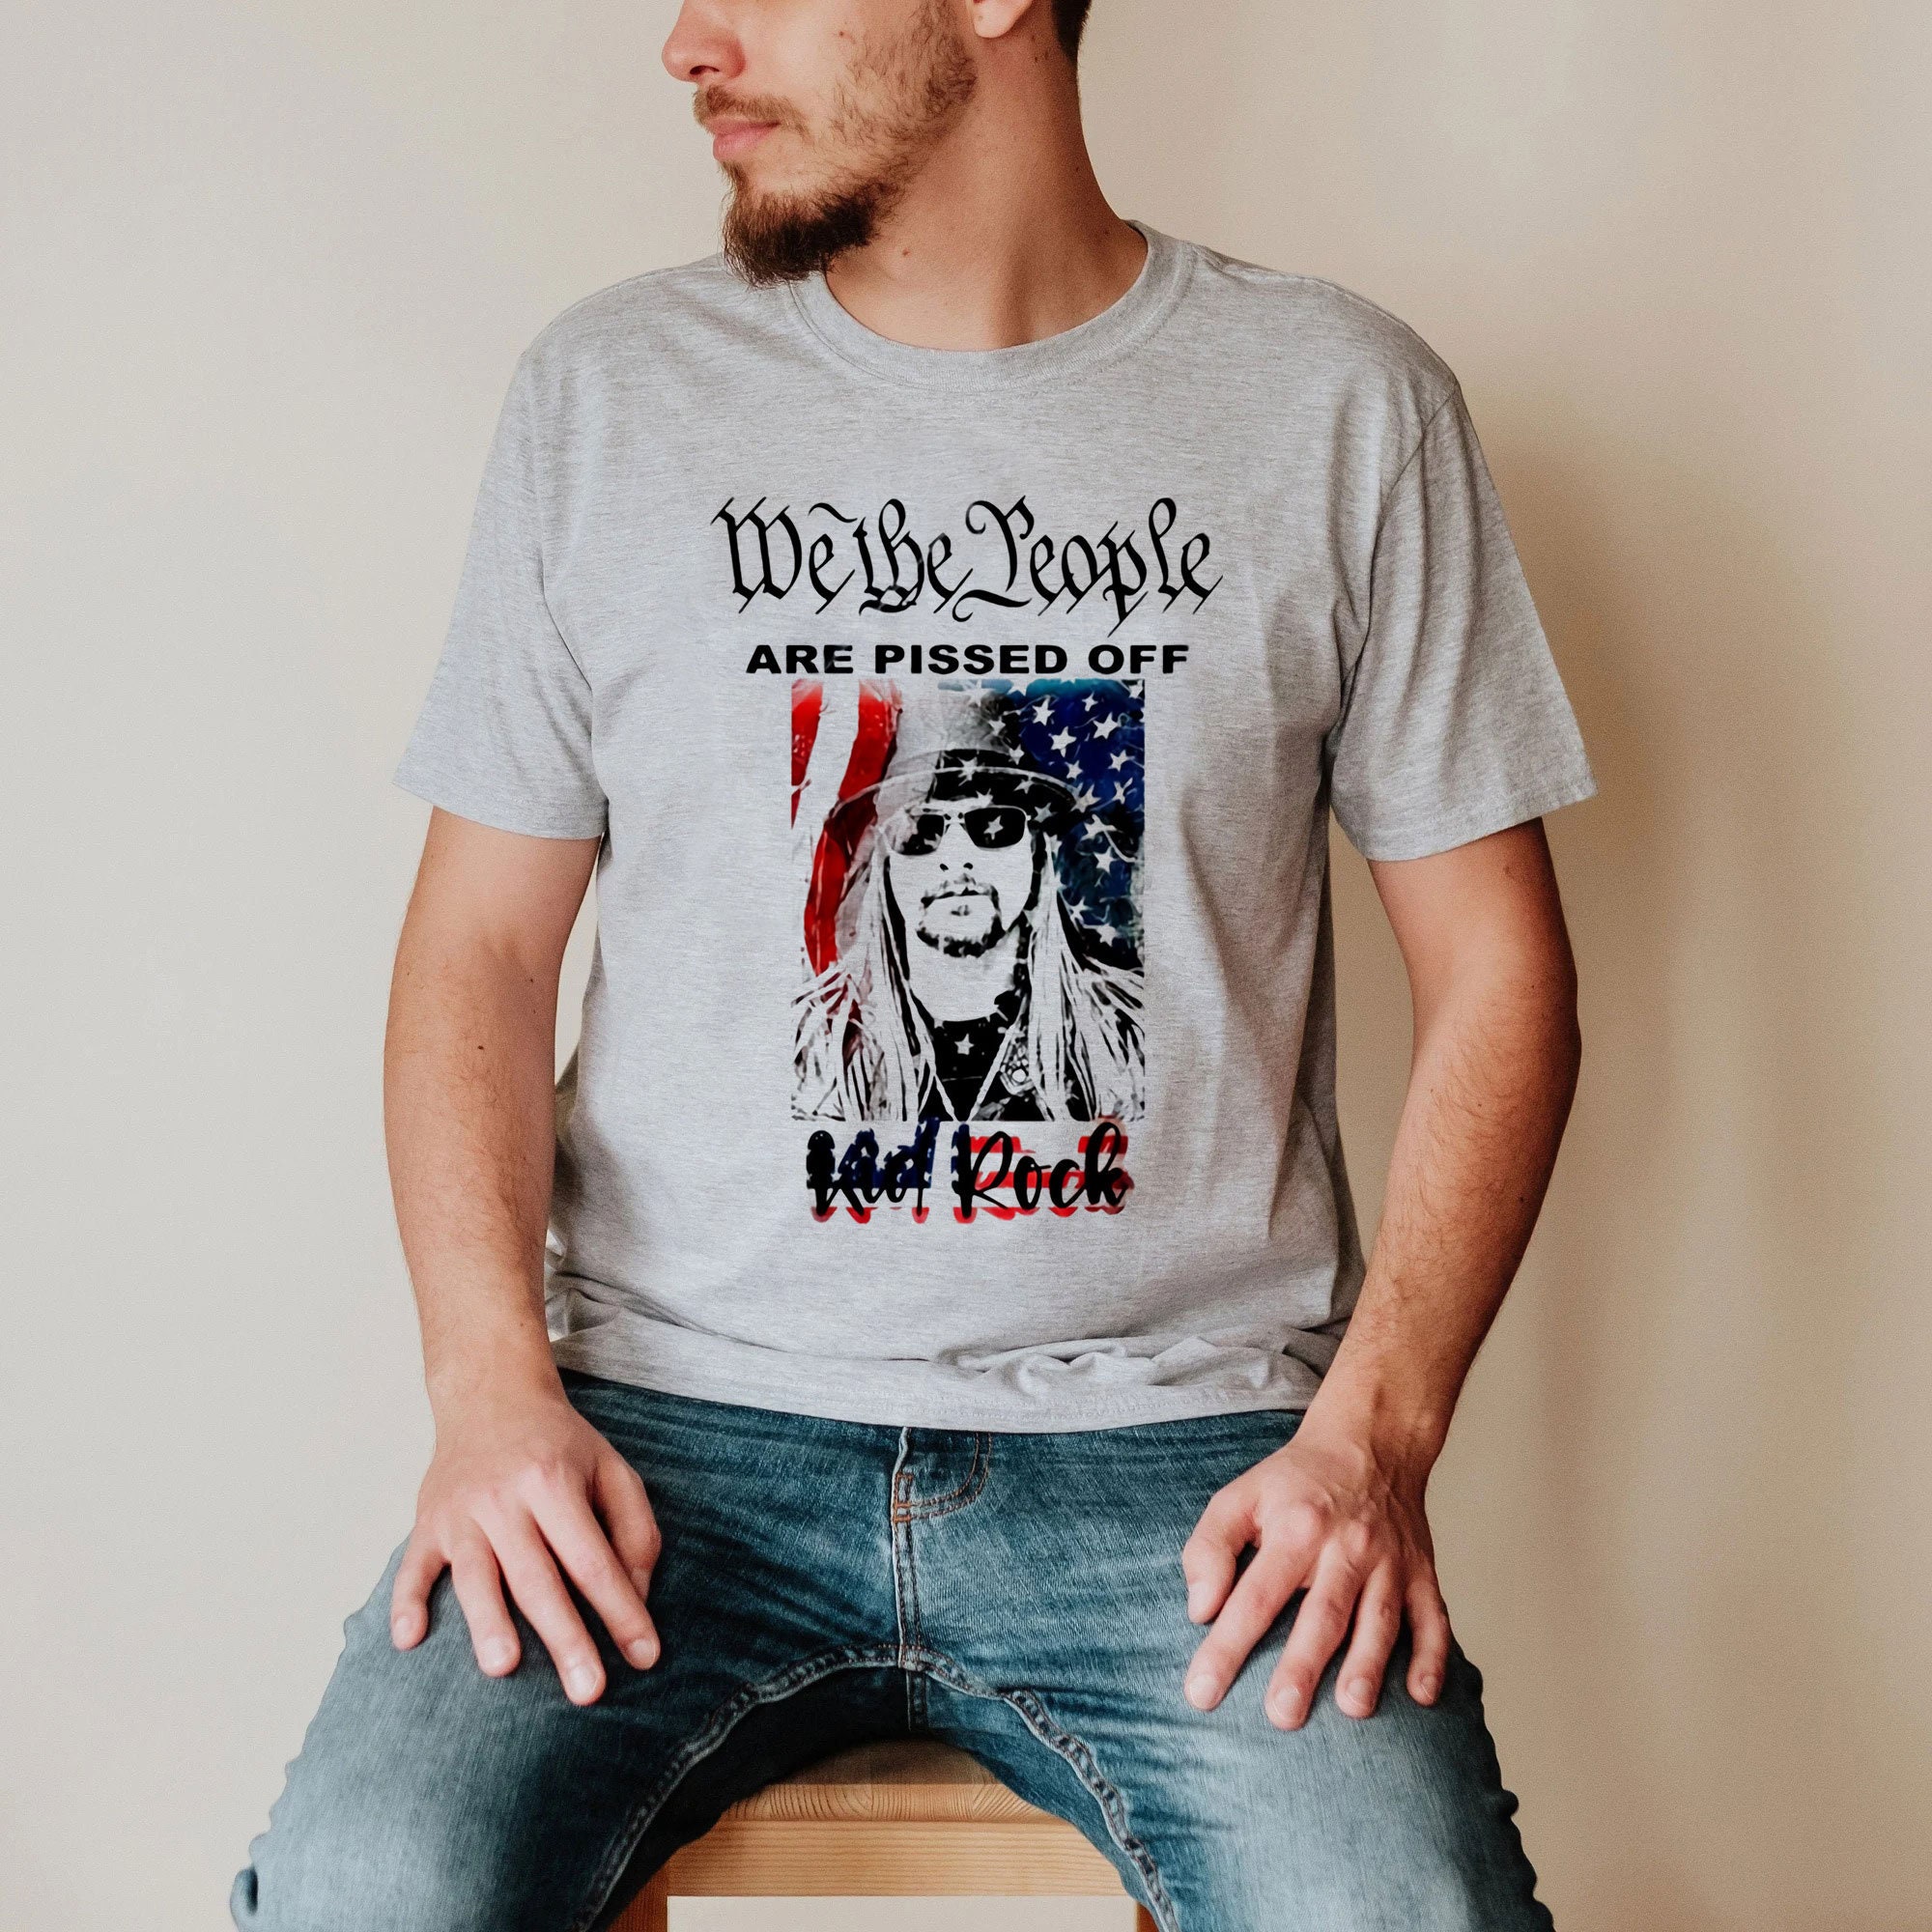 Kid Rock Tshirt, American Rock And Roll Kid Rock, Kid Rock Fans Shirt, We The People Are Pissed Off Kid Rock